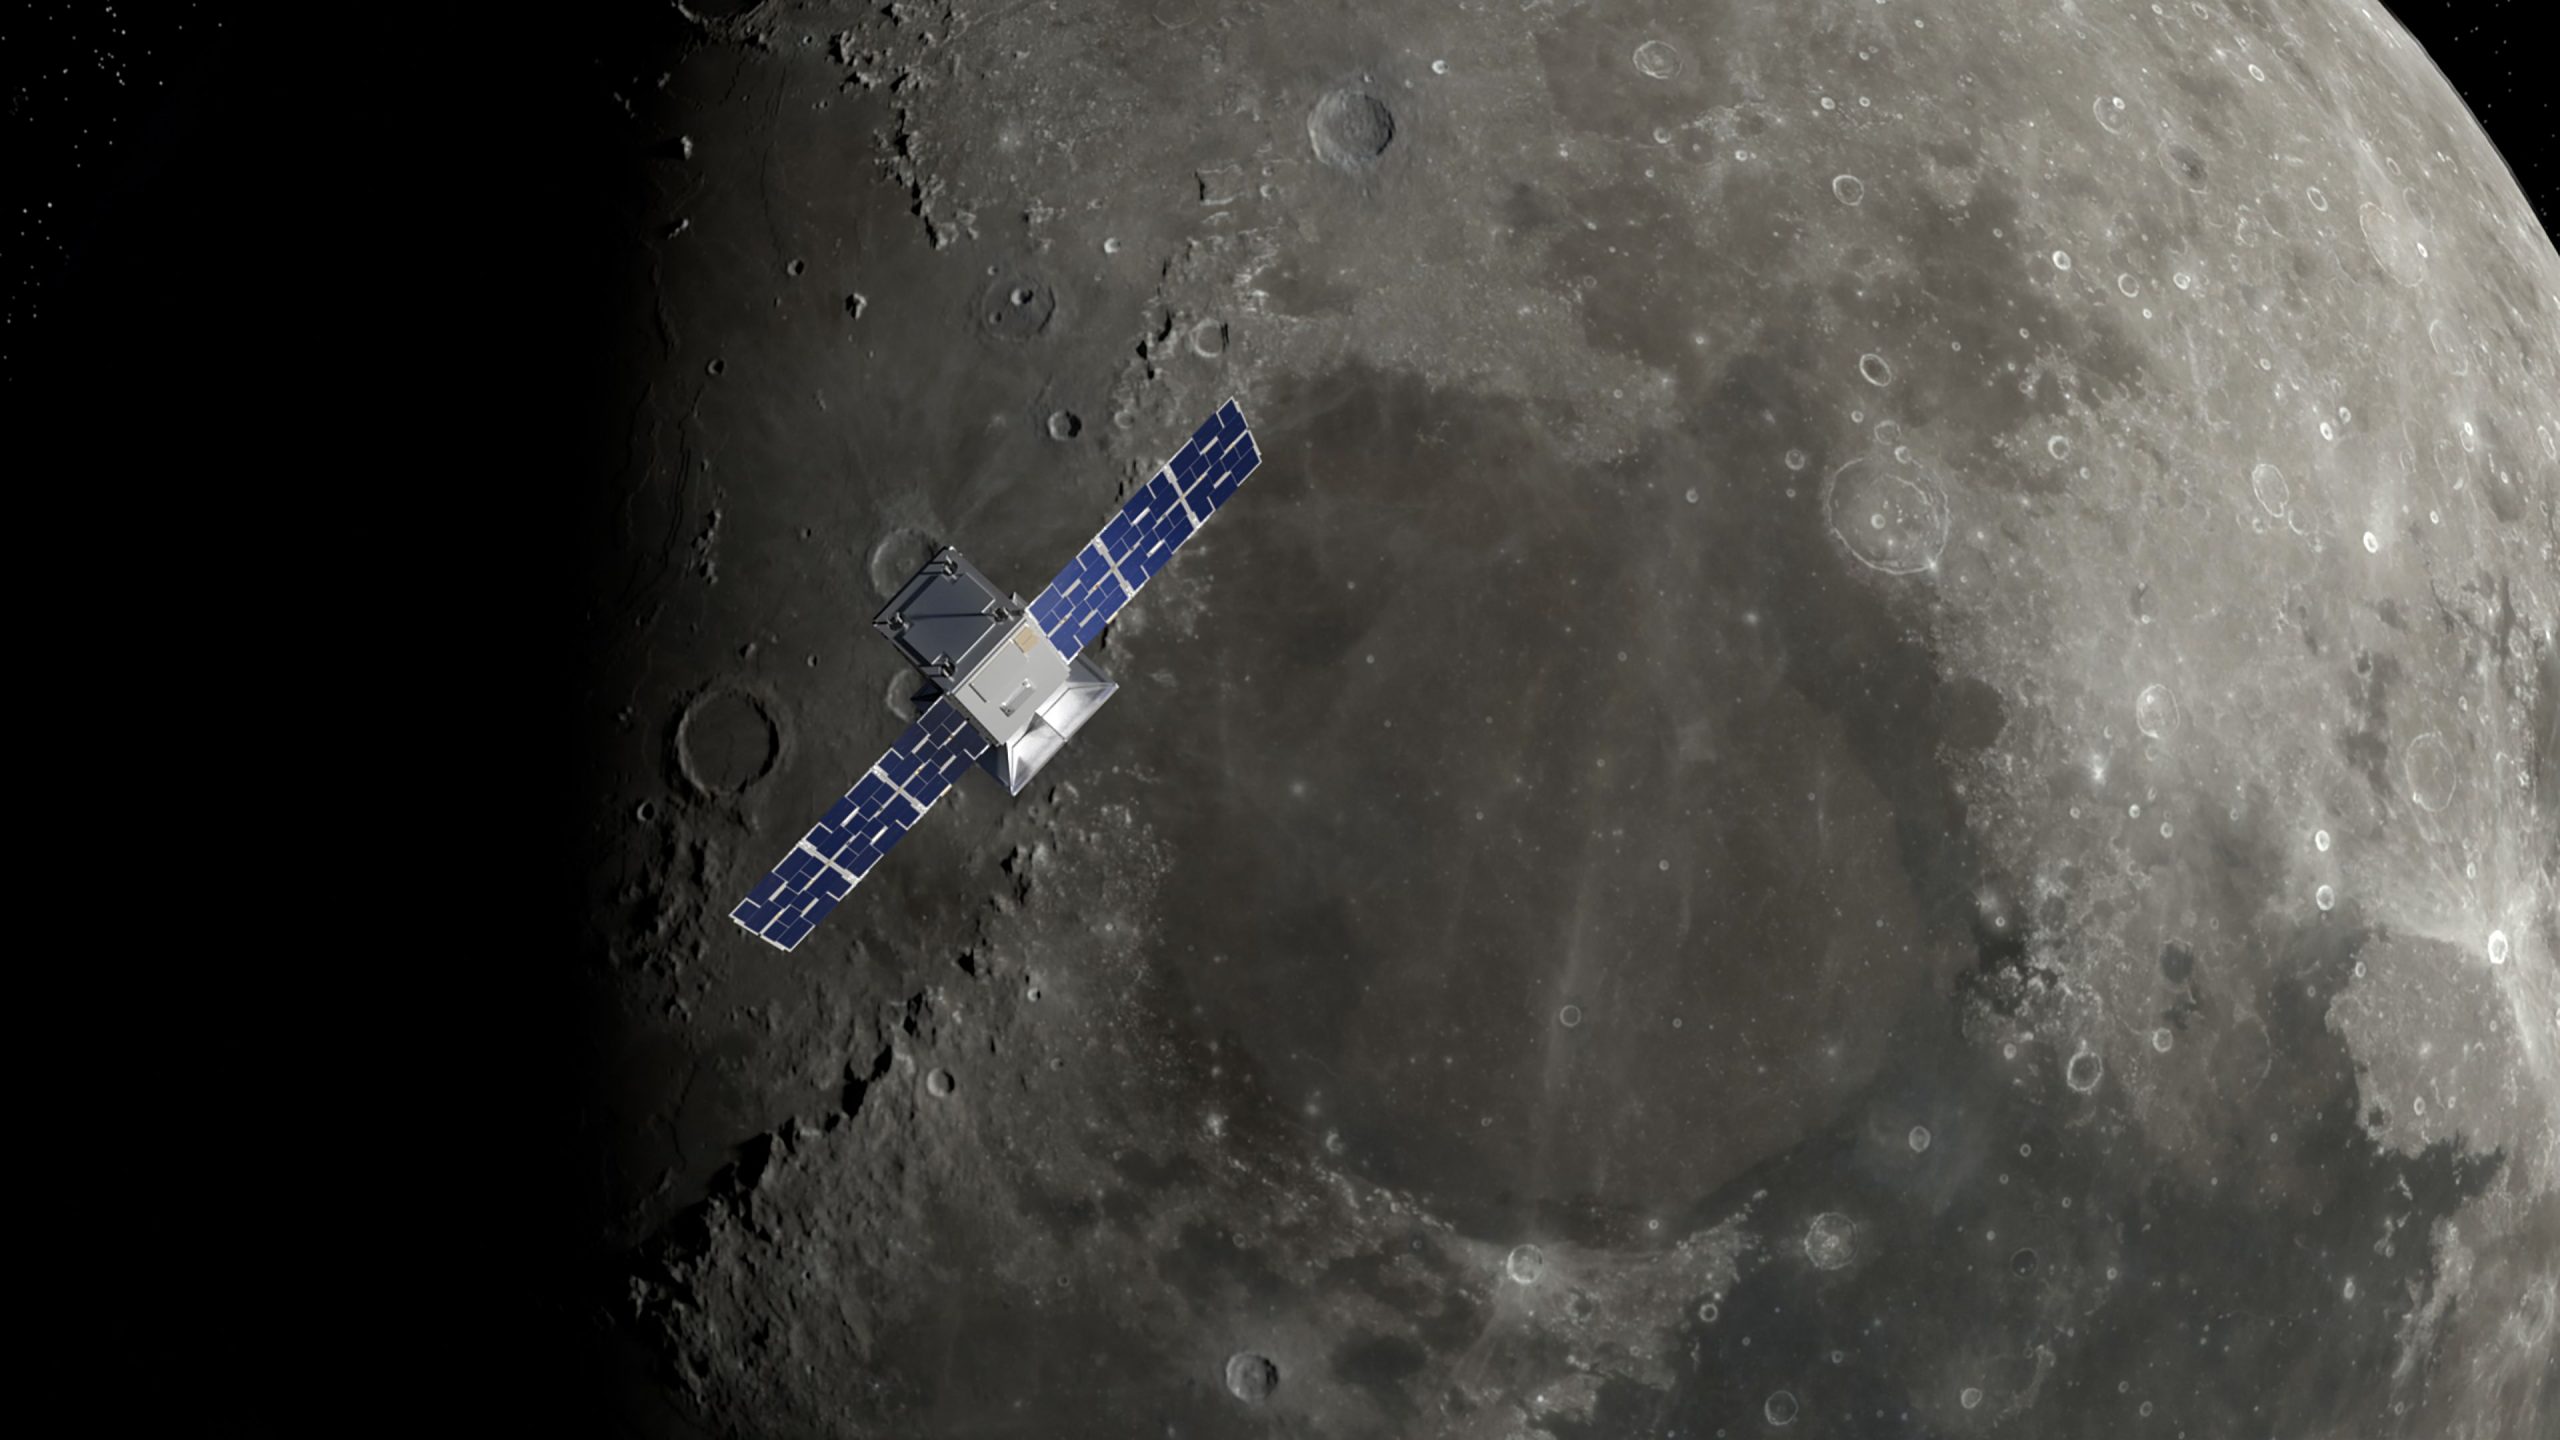 Cubical spacecraft with wide solar panels in orbit over the moon.